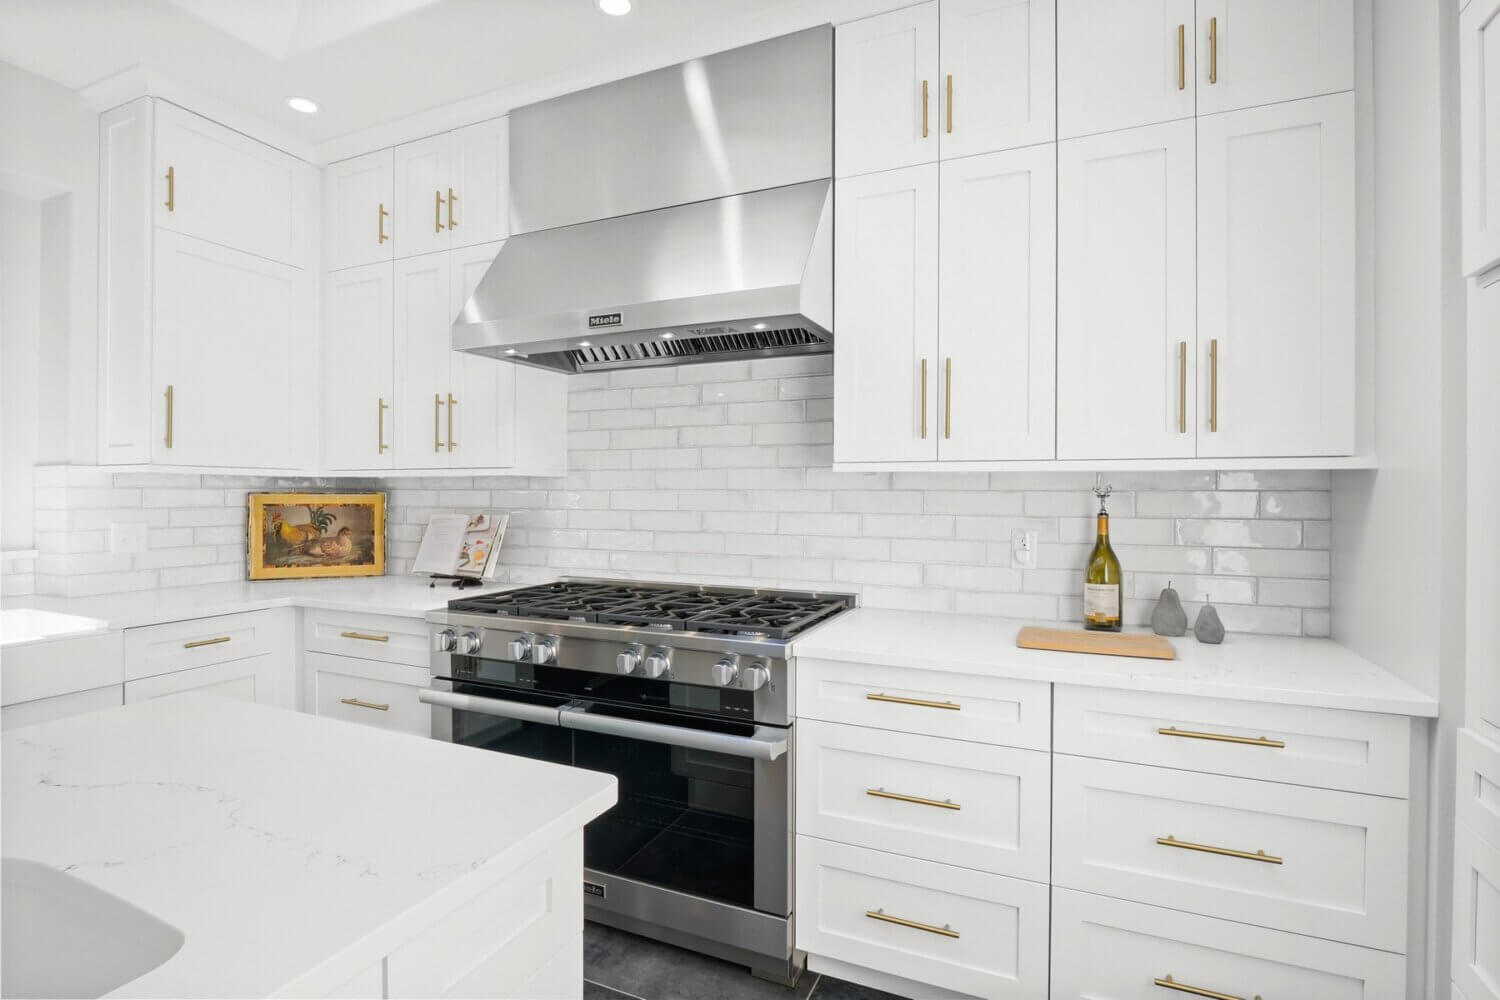 An all white kitchen with shaker cabinetry from Dura Supreme Cabinetry, brass hardware, and stainless steel appliances.